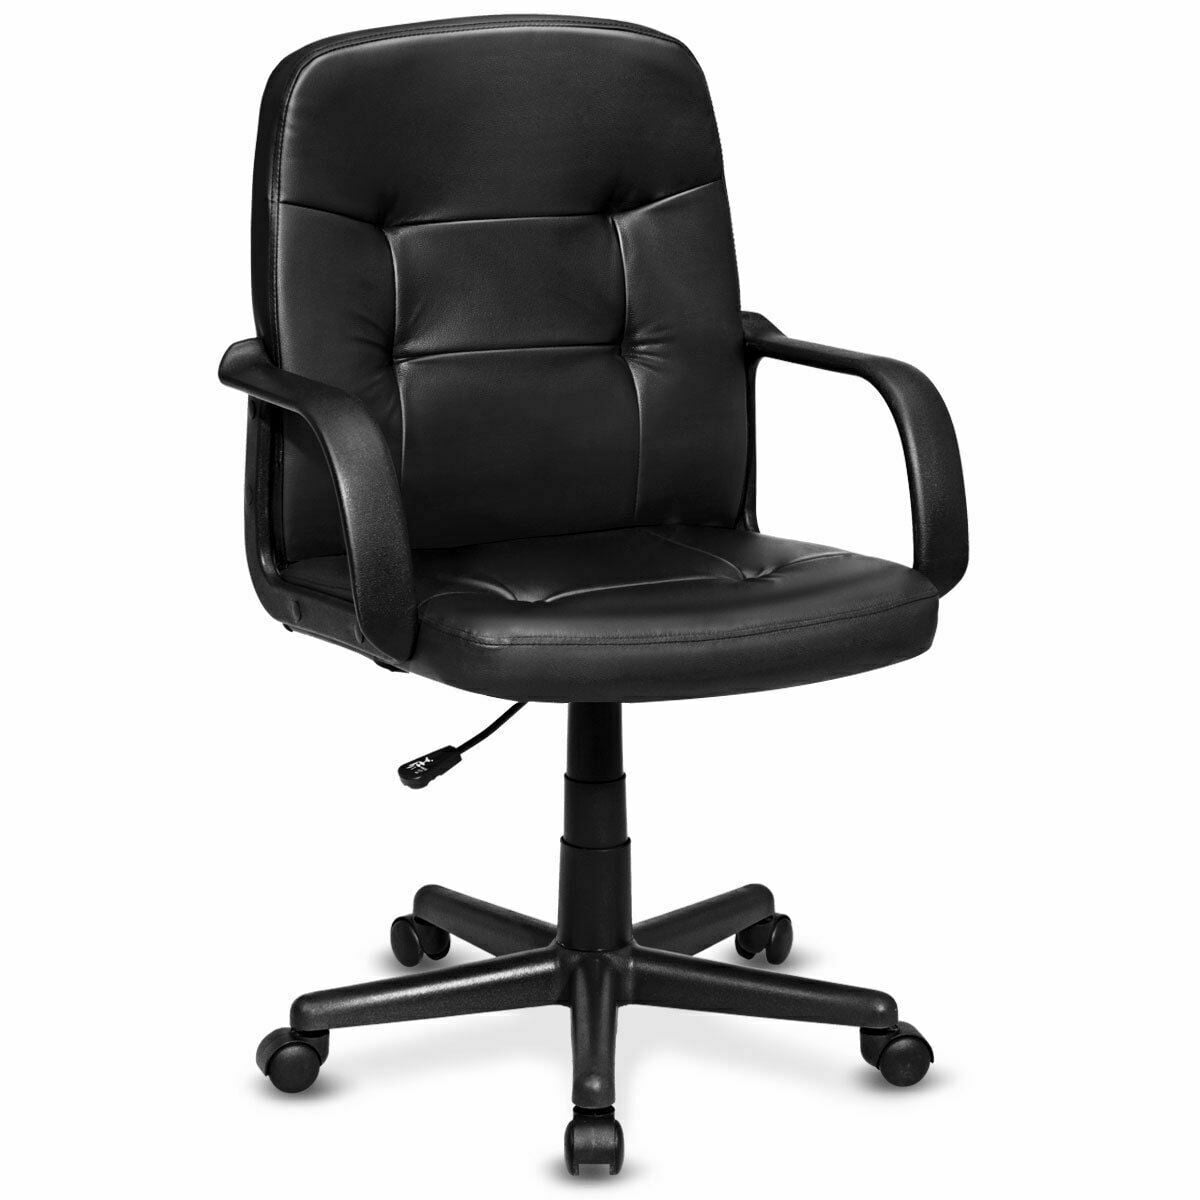 Essentials by OFM Bonded Leather Executive Side Chair Black 845123089408 for sale online 